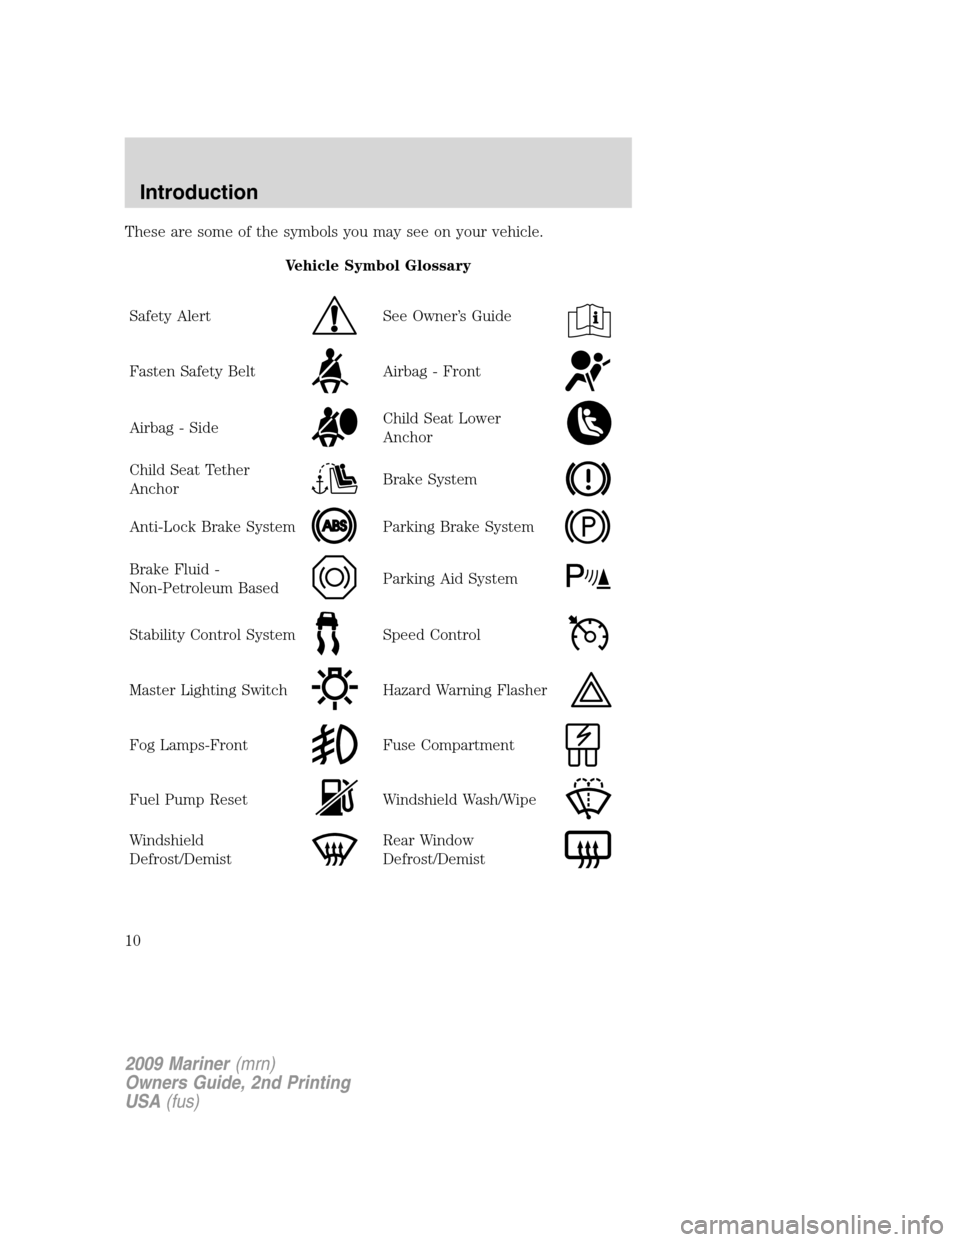 Mercury Mariner 2009  Owners Manuals These are some of the symbols you may see on your vehicle.
Vehicle Symbol Glossary
Safety Alert
See Owner’s Guide
Fasten Safety BeltAirbag - Front
Airbag - SideChild Seat Lower
Anchor
Child Seat Tet